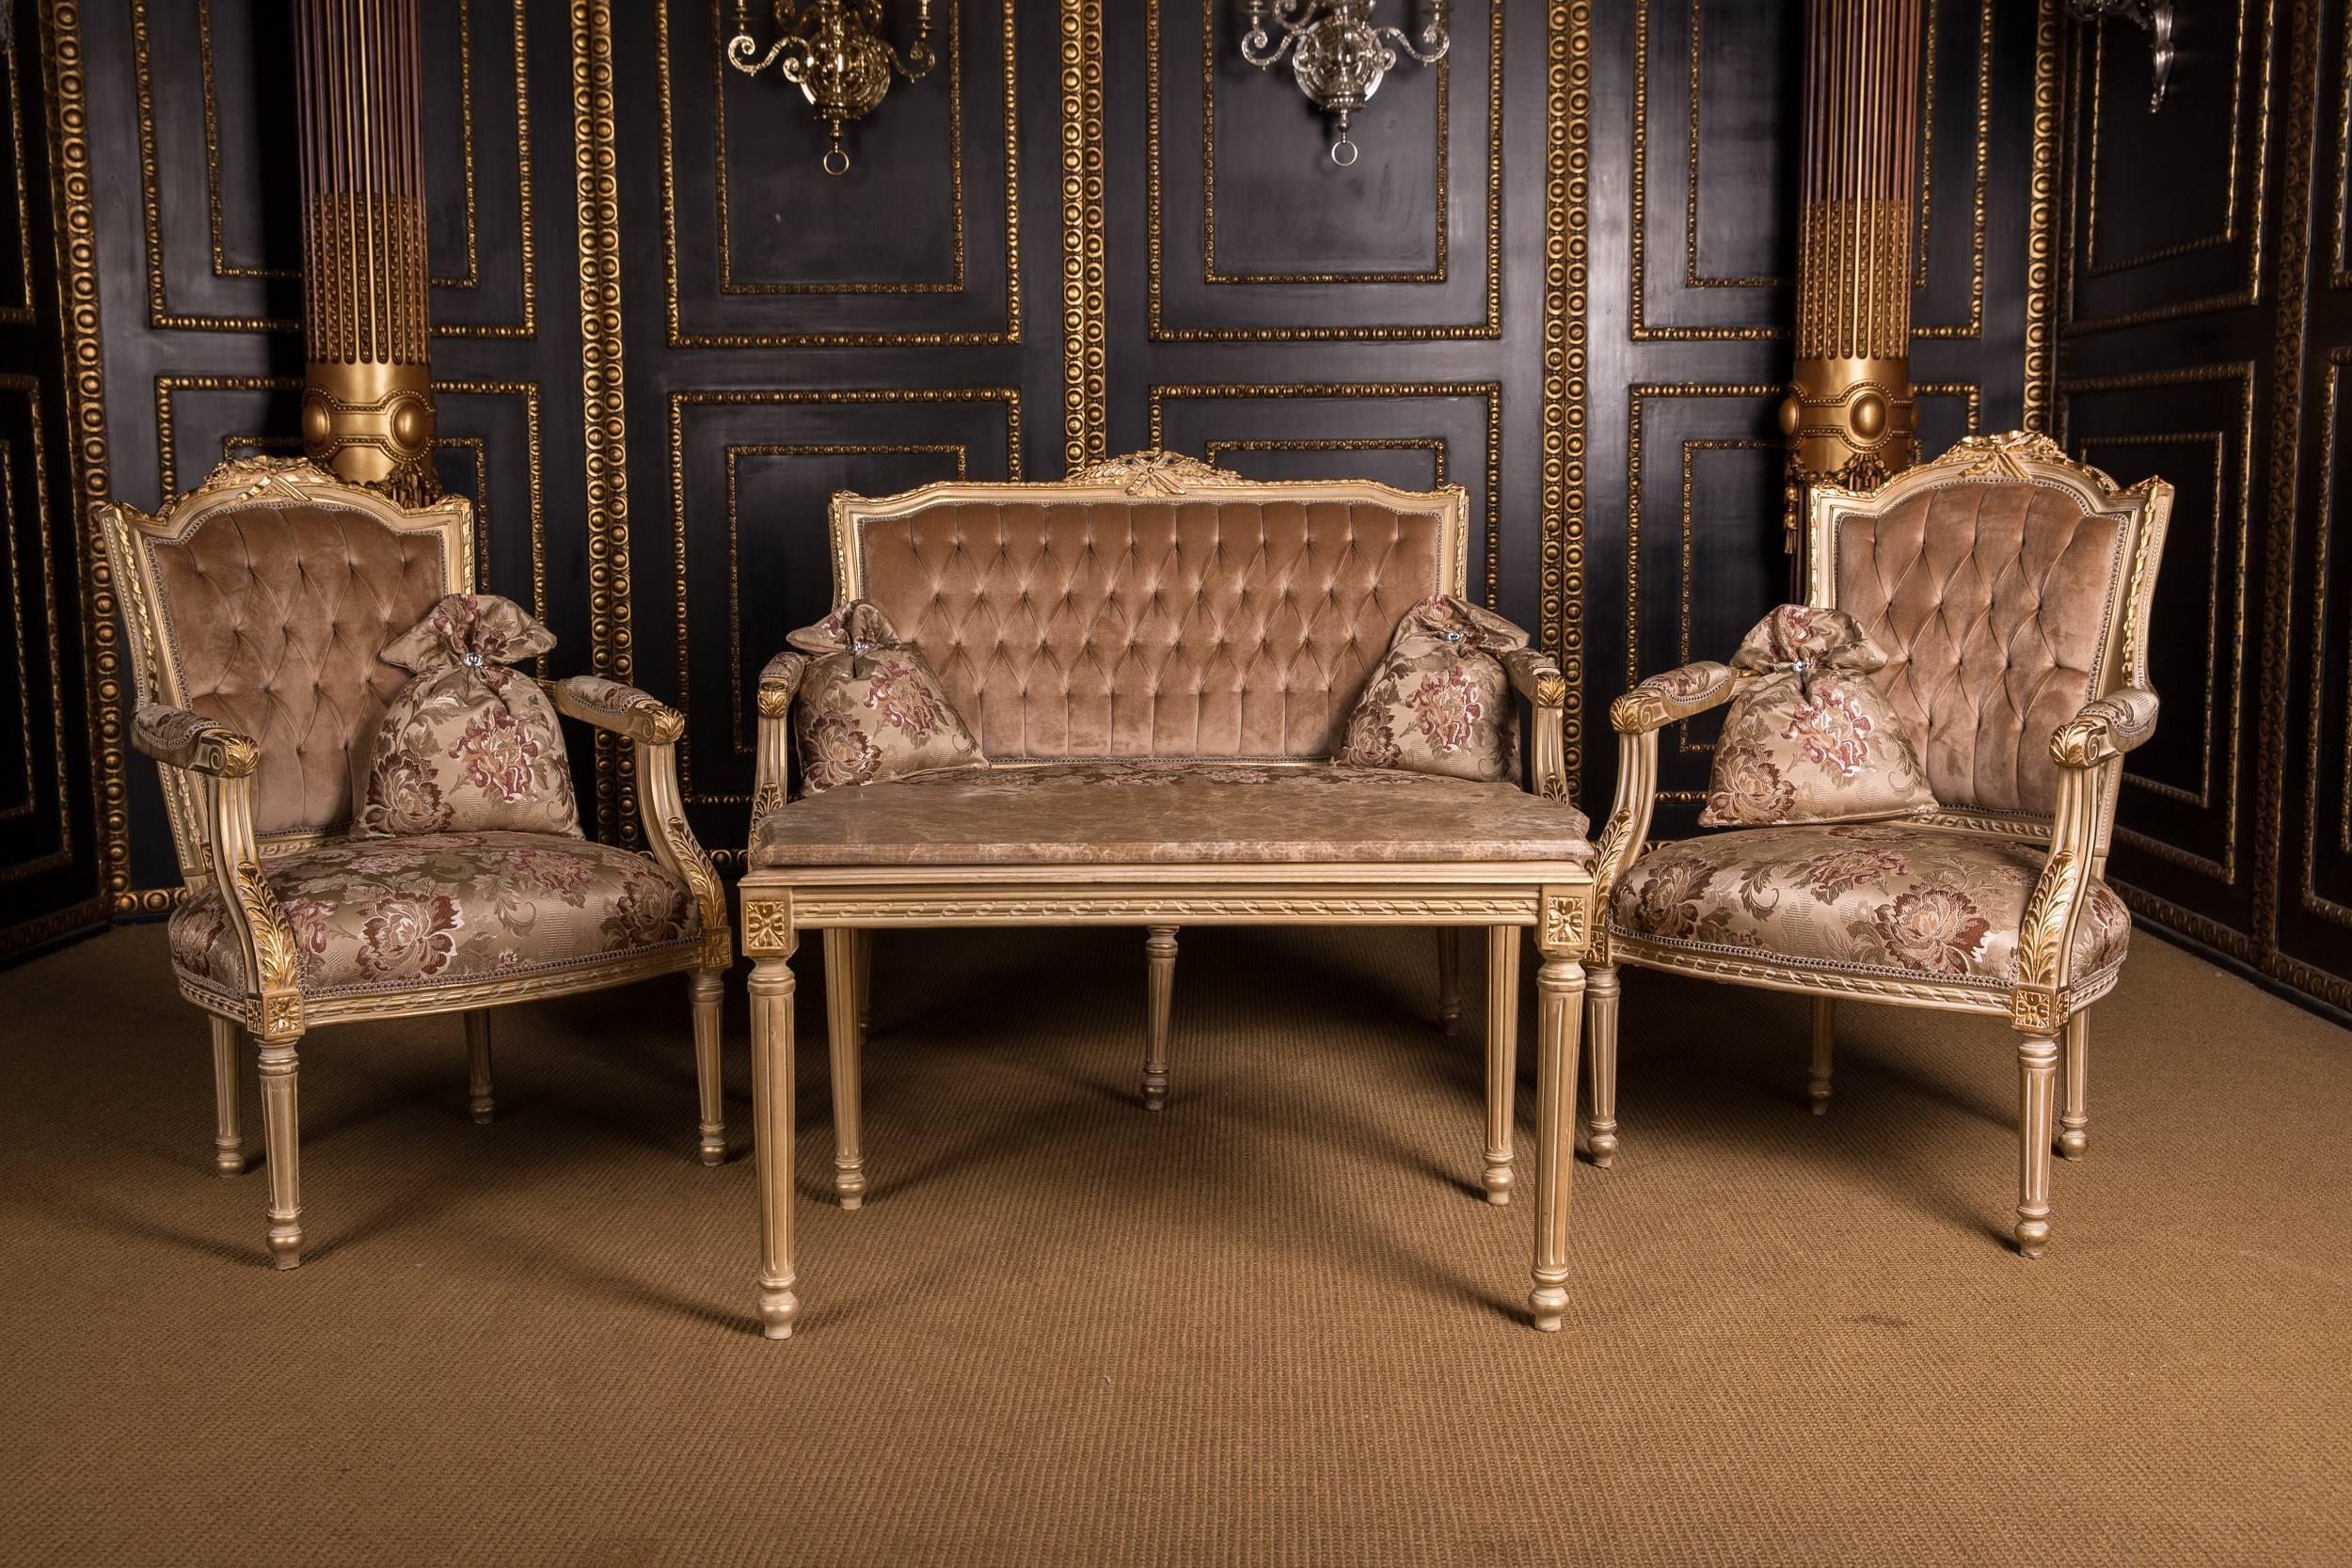 Classic French Seating Set Sofa and Two Armchairs in the Louis Seize Style (Louis XVI.)